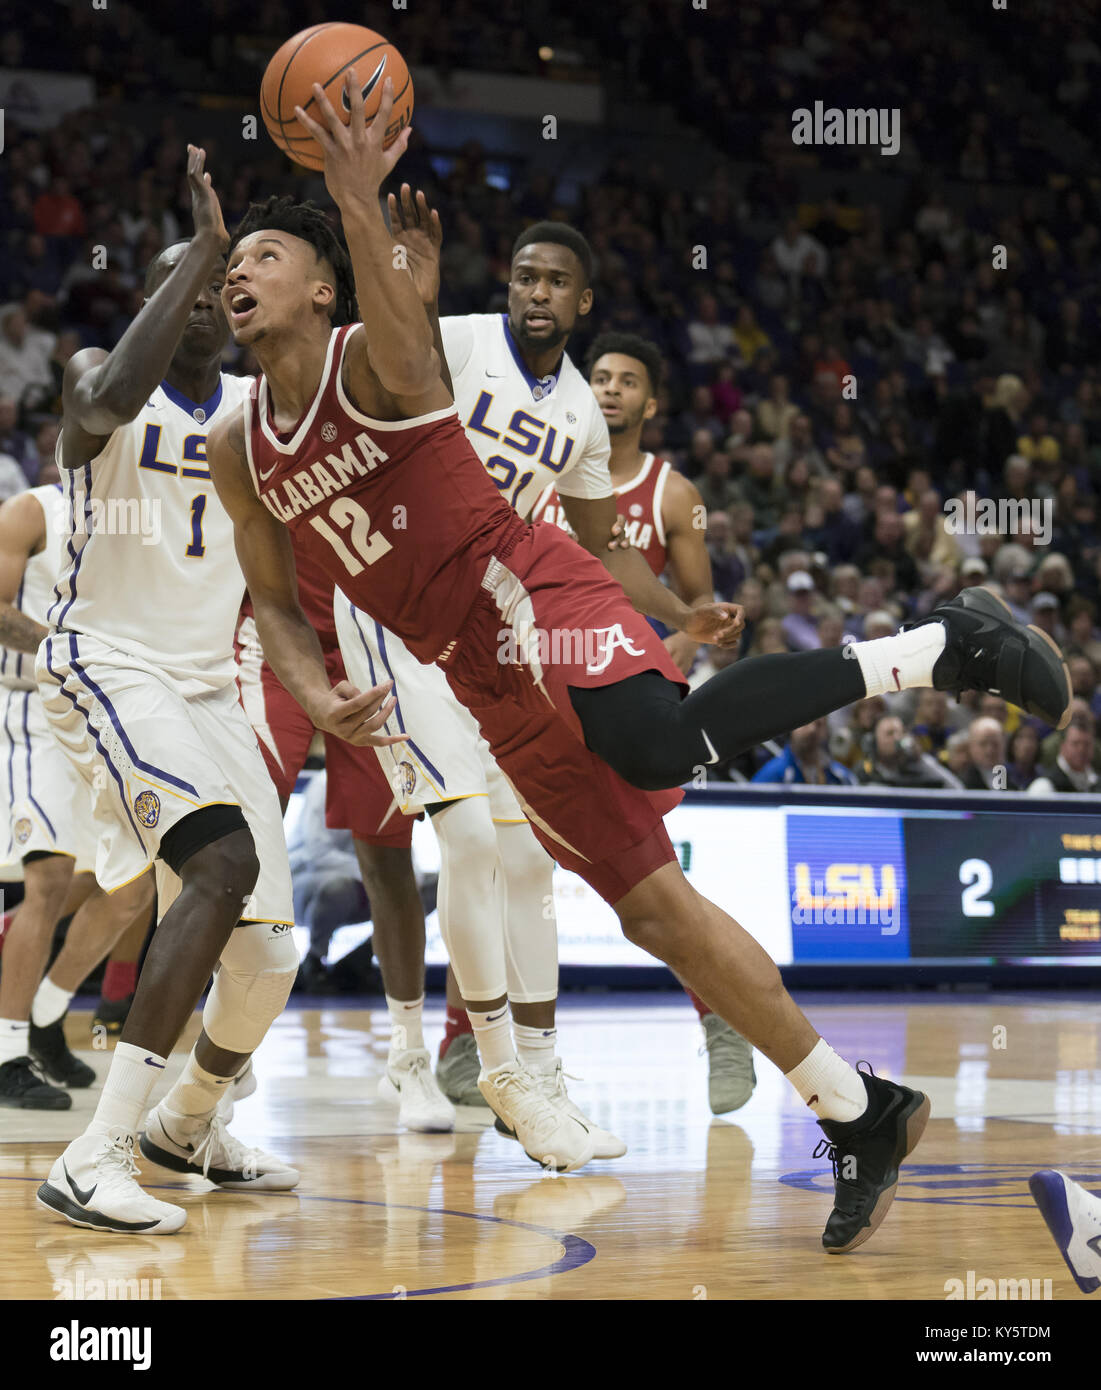 January 13, 2018 - January 13, 2018- Baton Rouge, LA, U.S- Alabama guard DAZON INGRAM (12) drives to the basket in the first half at the Pete Maravich Assembly Center. Credit: Jerome Hicks/ZUMA Wire/Alamy Live News Stock Photo